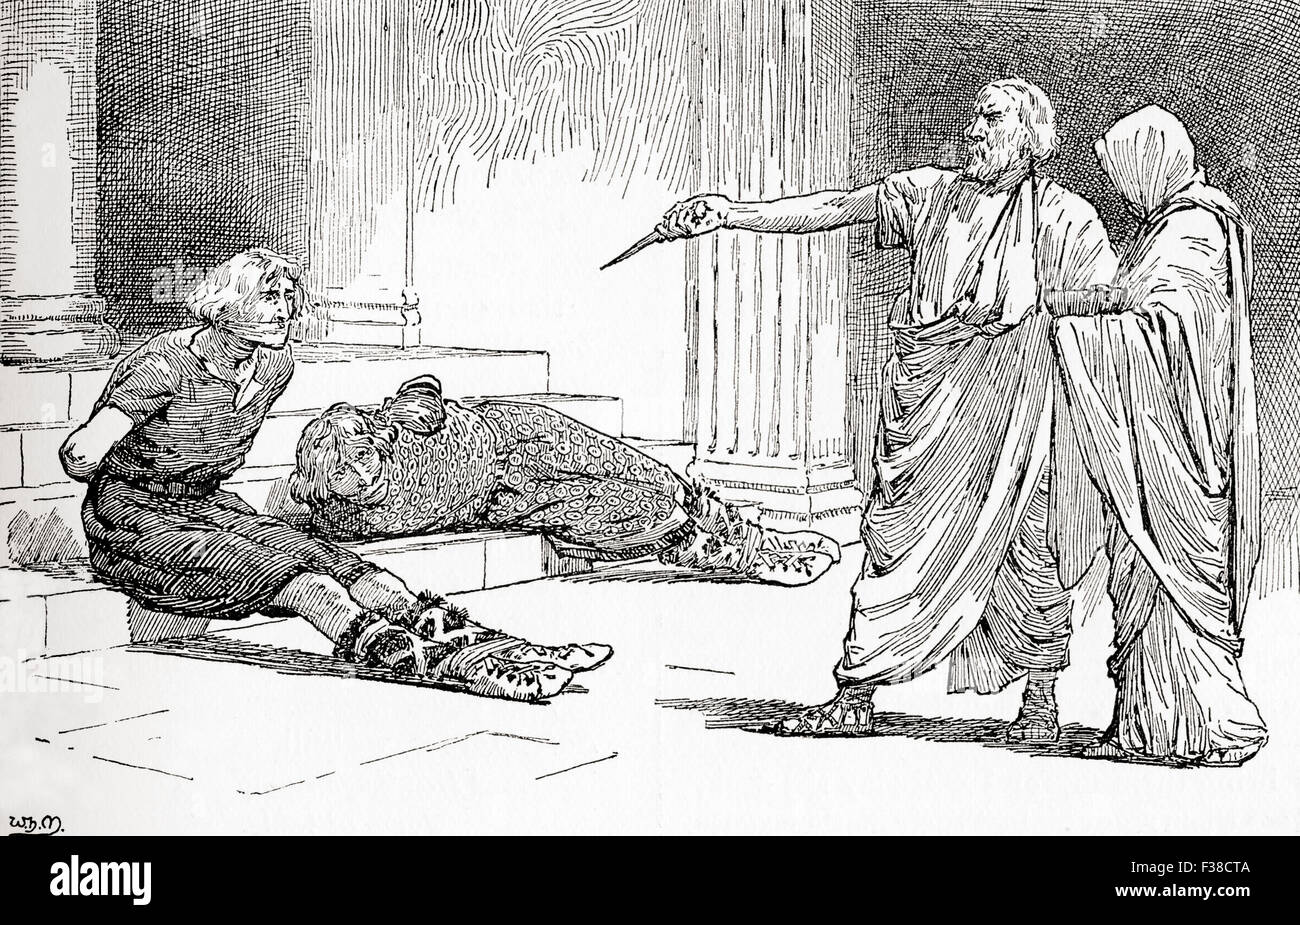 A scene from William Shakespeare's play Titus Andronicus.  Act V, scene 2. Titus: 'Come, come, Lavinia, look, thy foes are bound.'   Illustration by Gordon Browne. Stock Photo